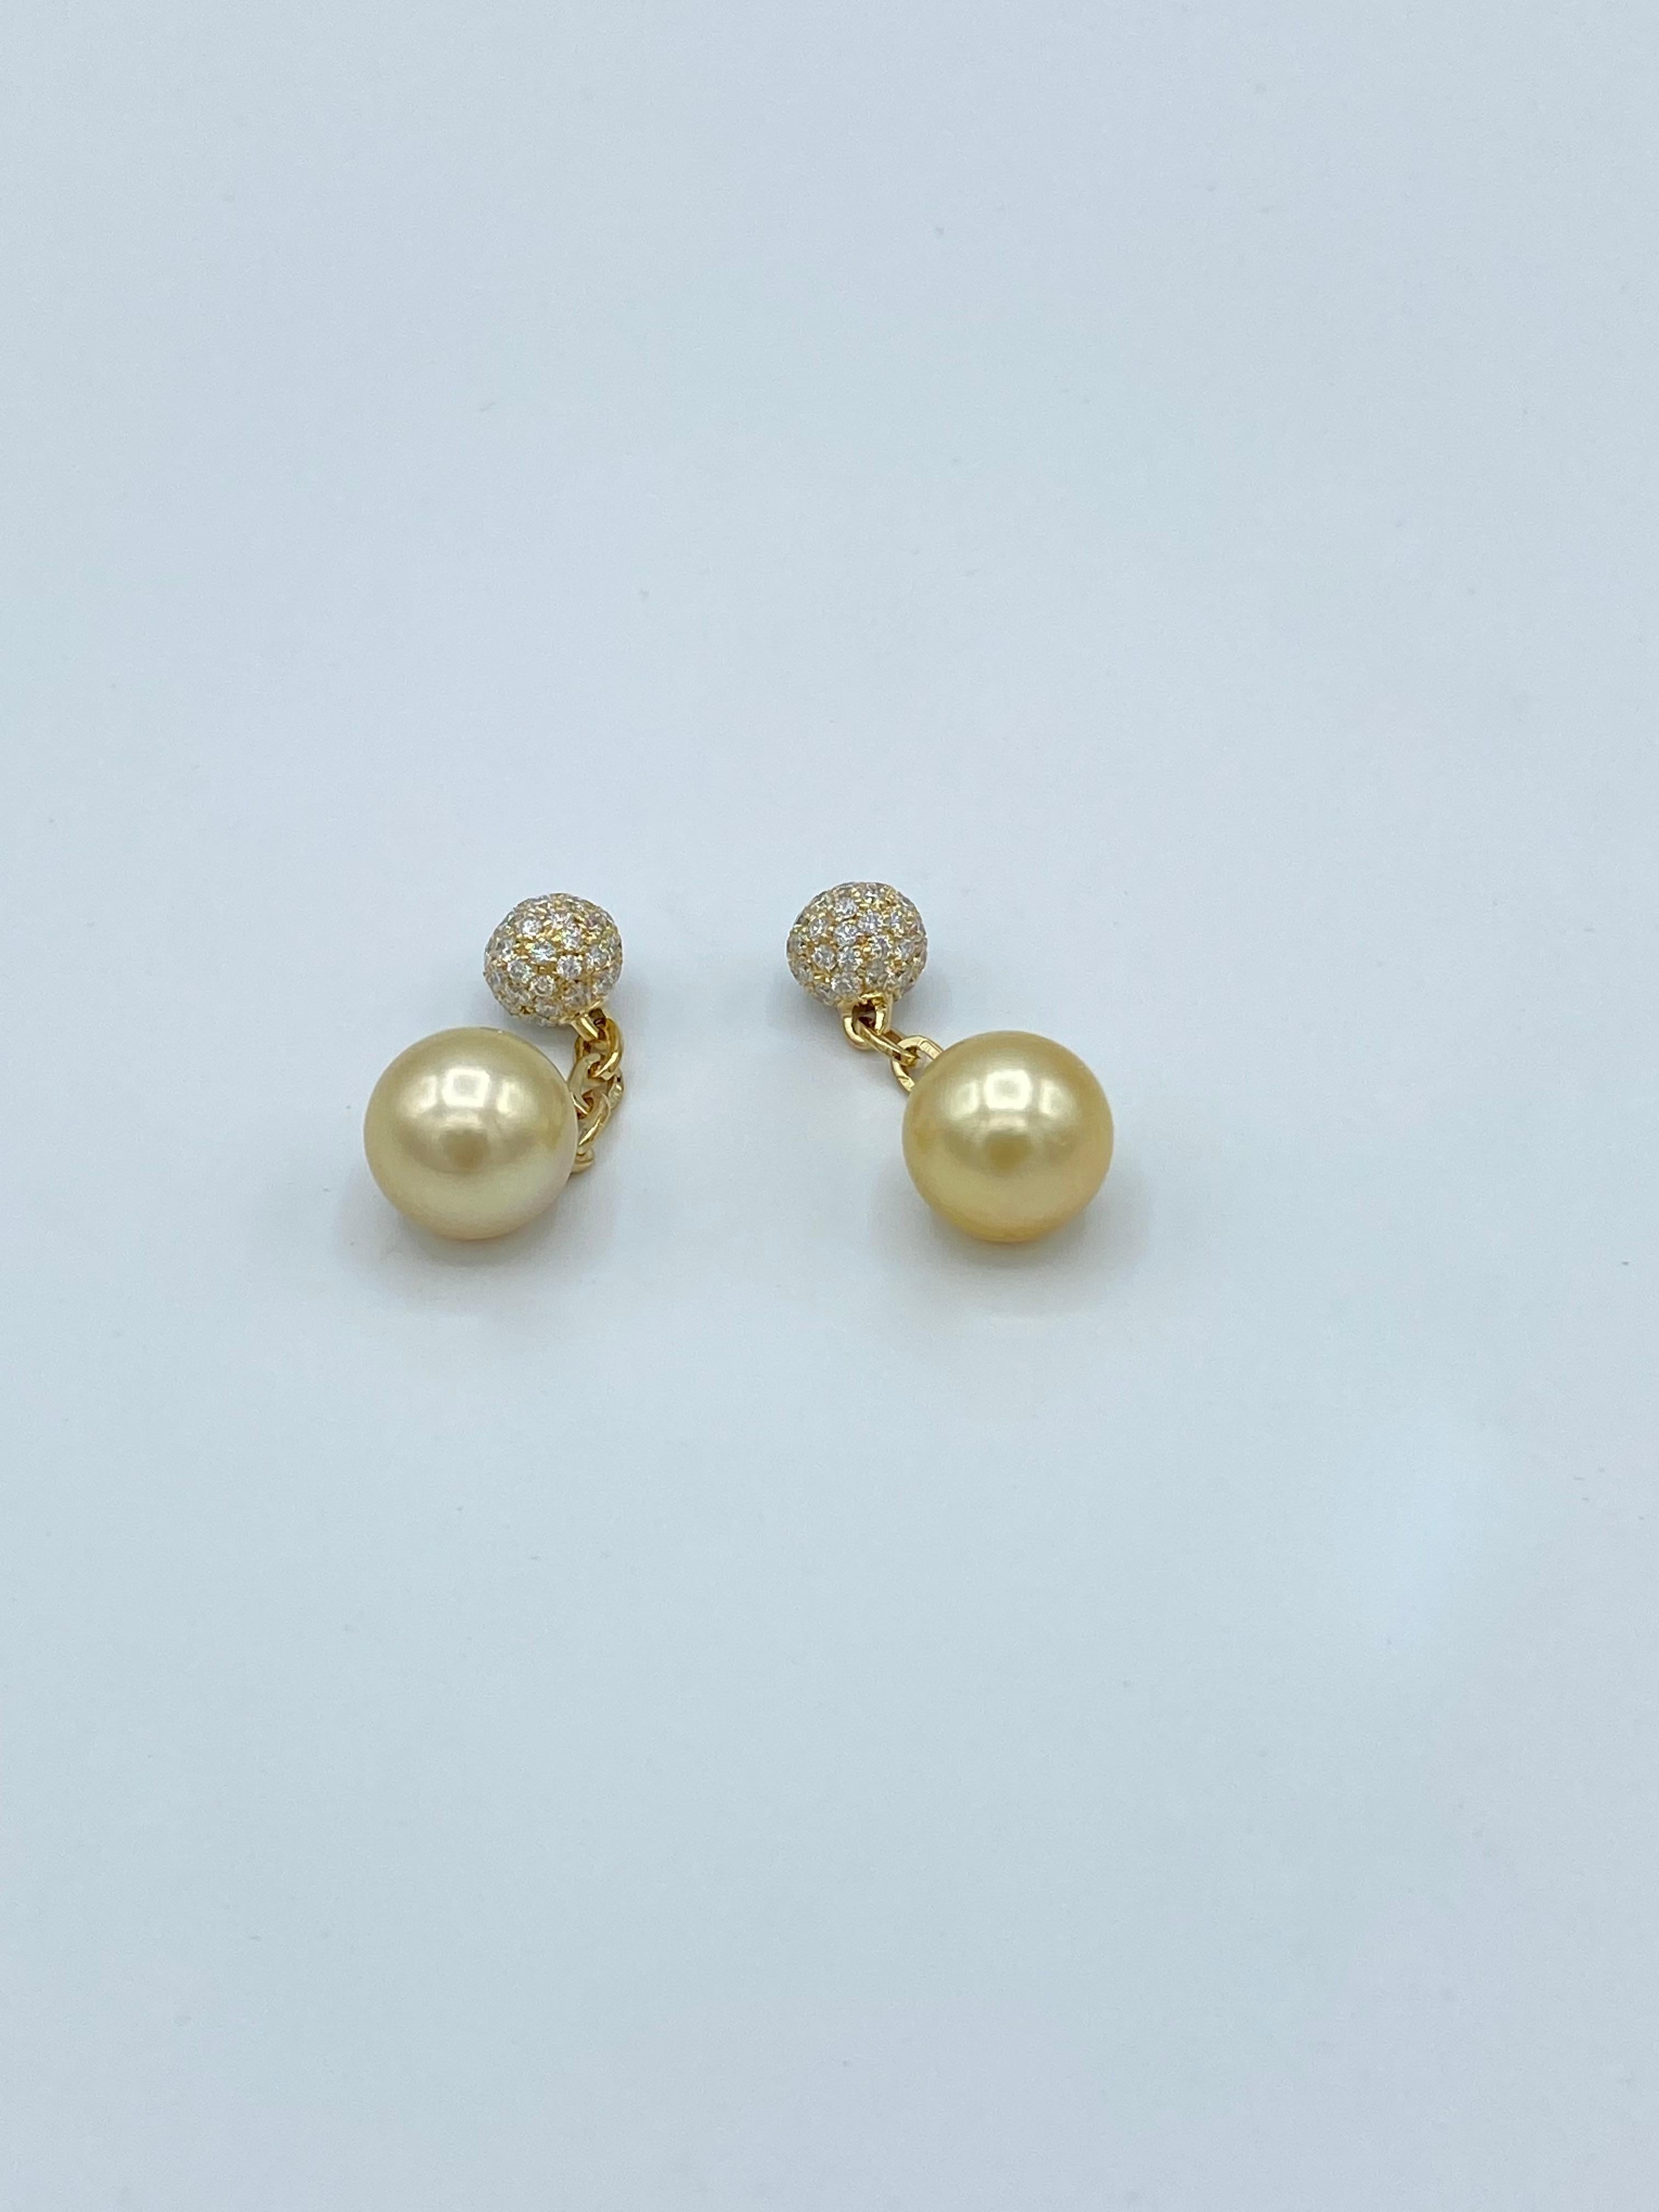 Round Cut White Diamond South Sea Pearl 18 Karat Gold Cufflinks Made in Italy For Sale